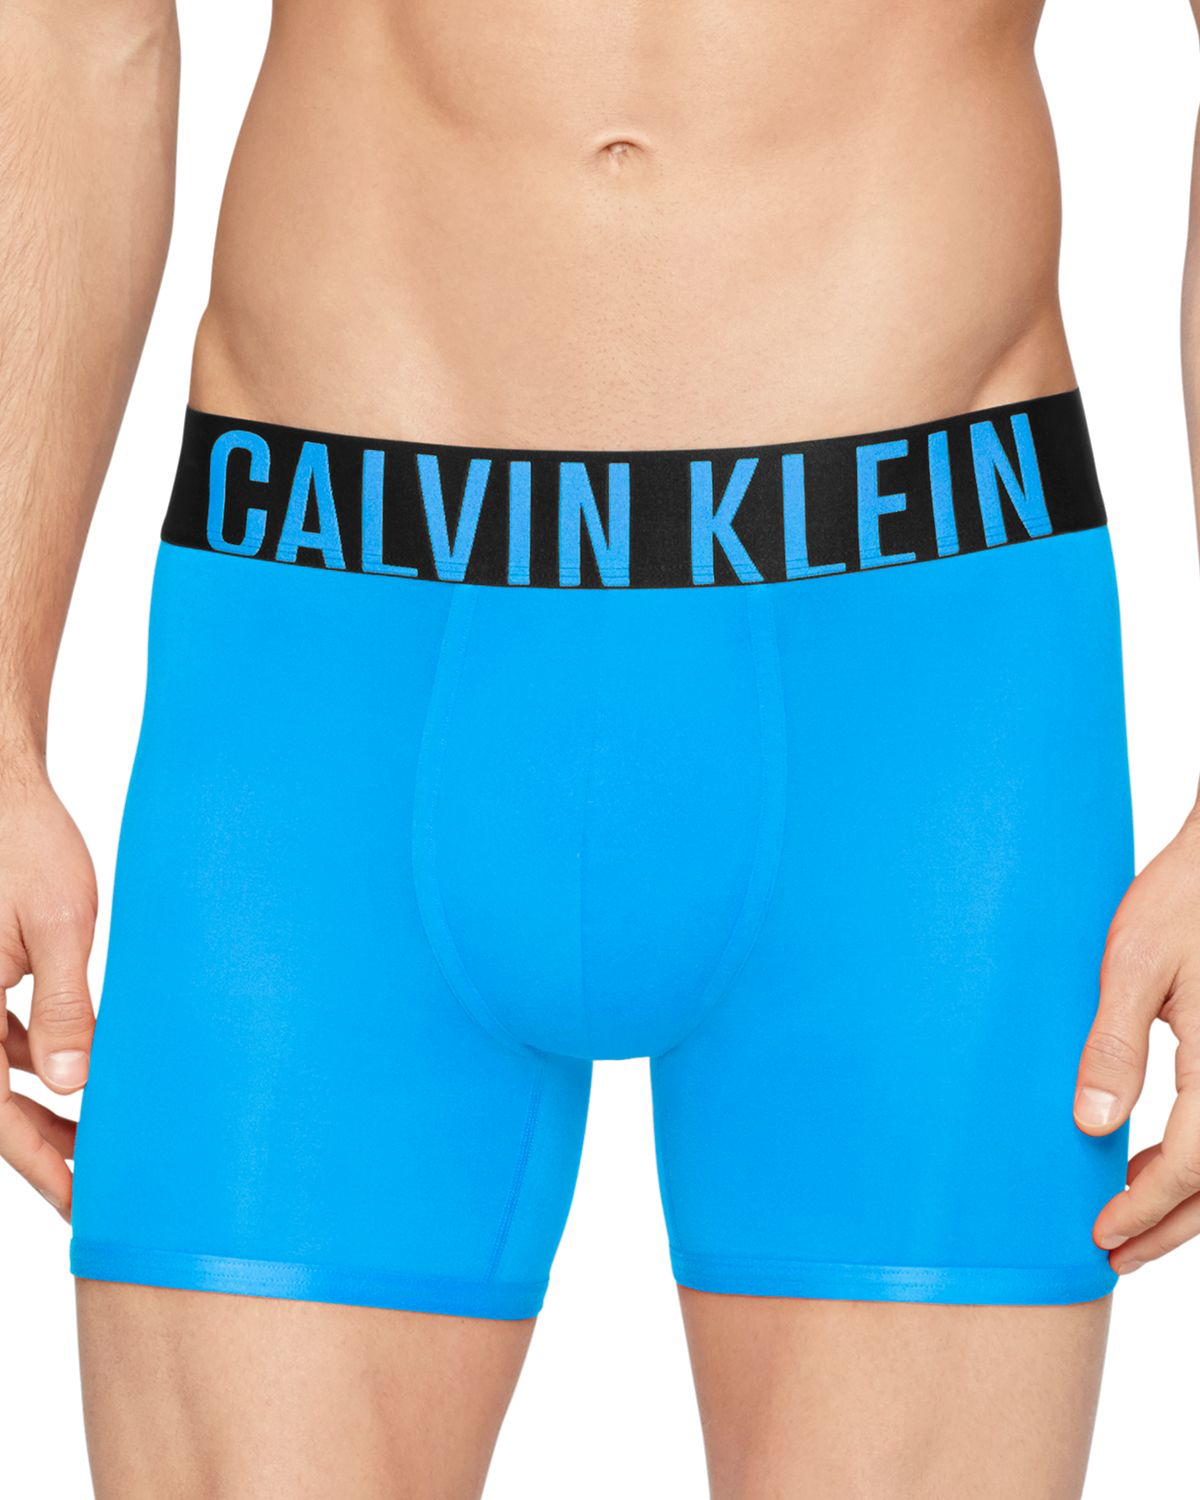 Lyst - Calvin klein Power Micro Boxer Briefs, Pack Of 2 in Blue for Men